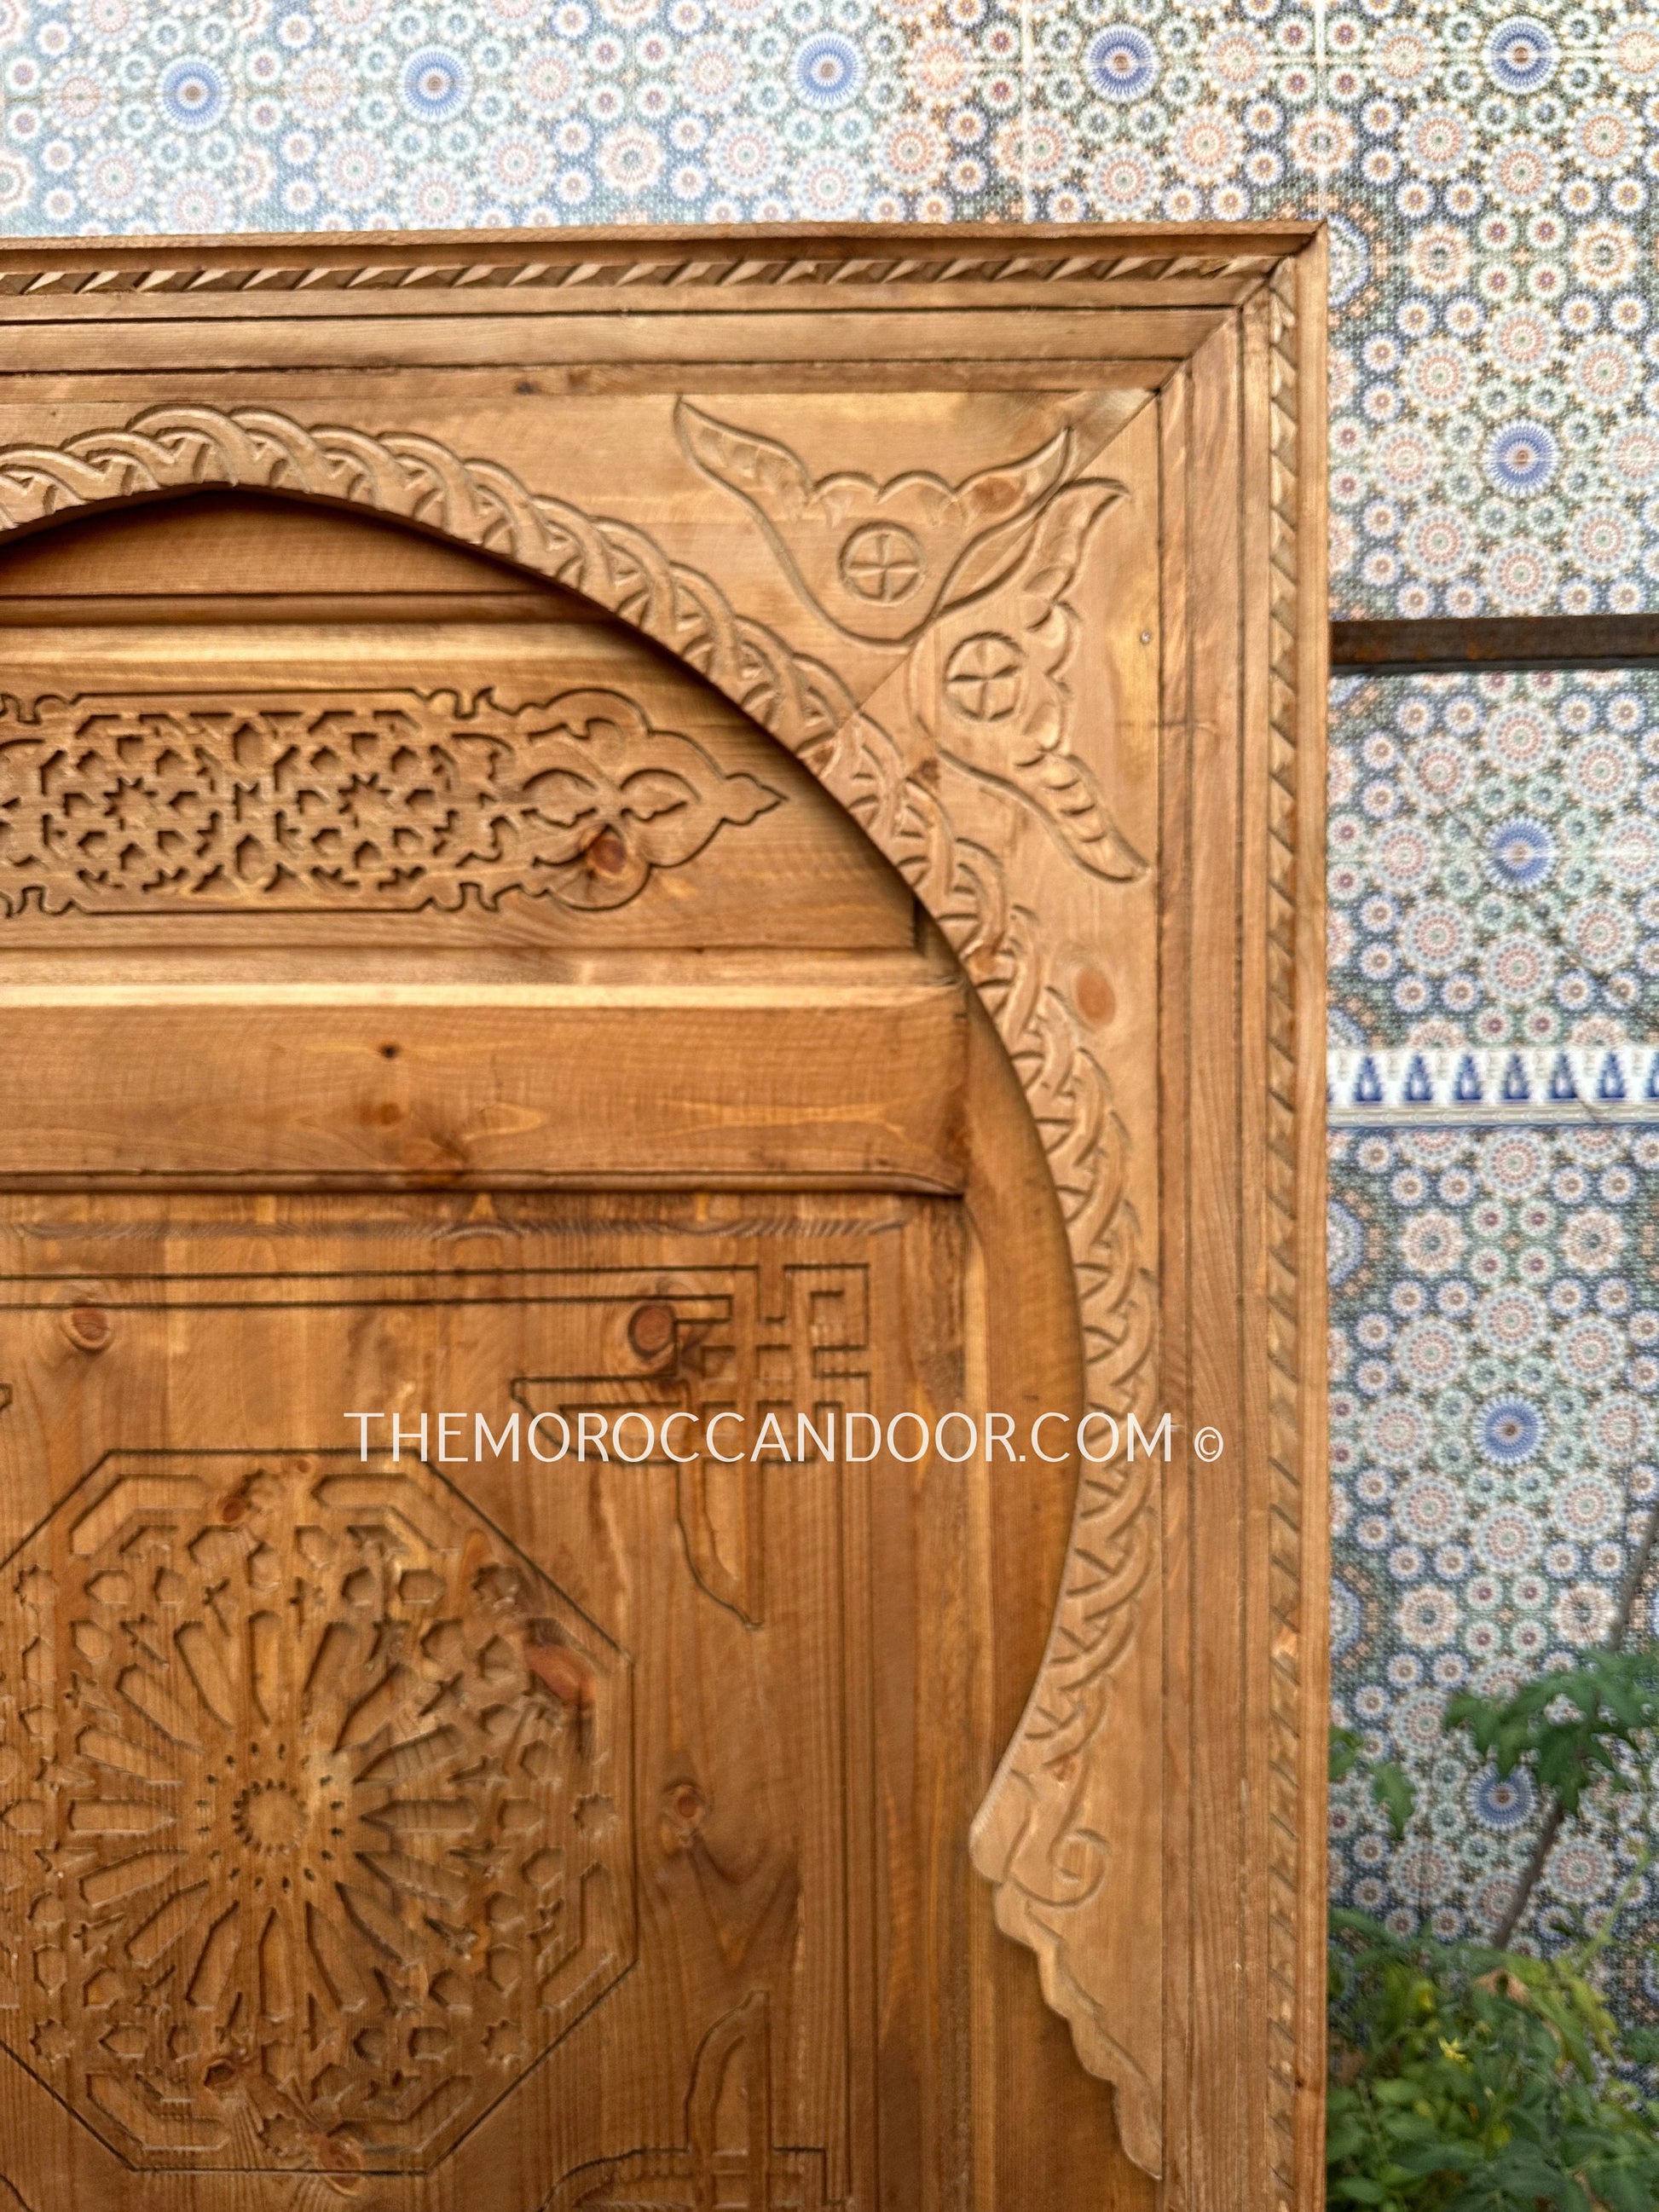 Solid wood Moroccan door adorned with intricate designs